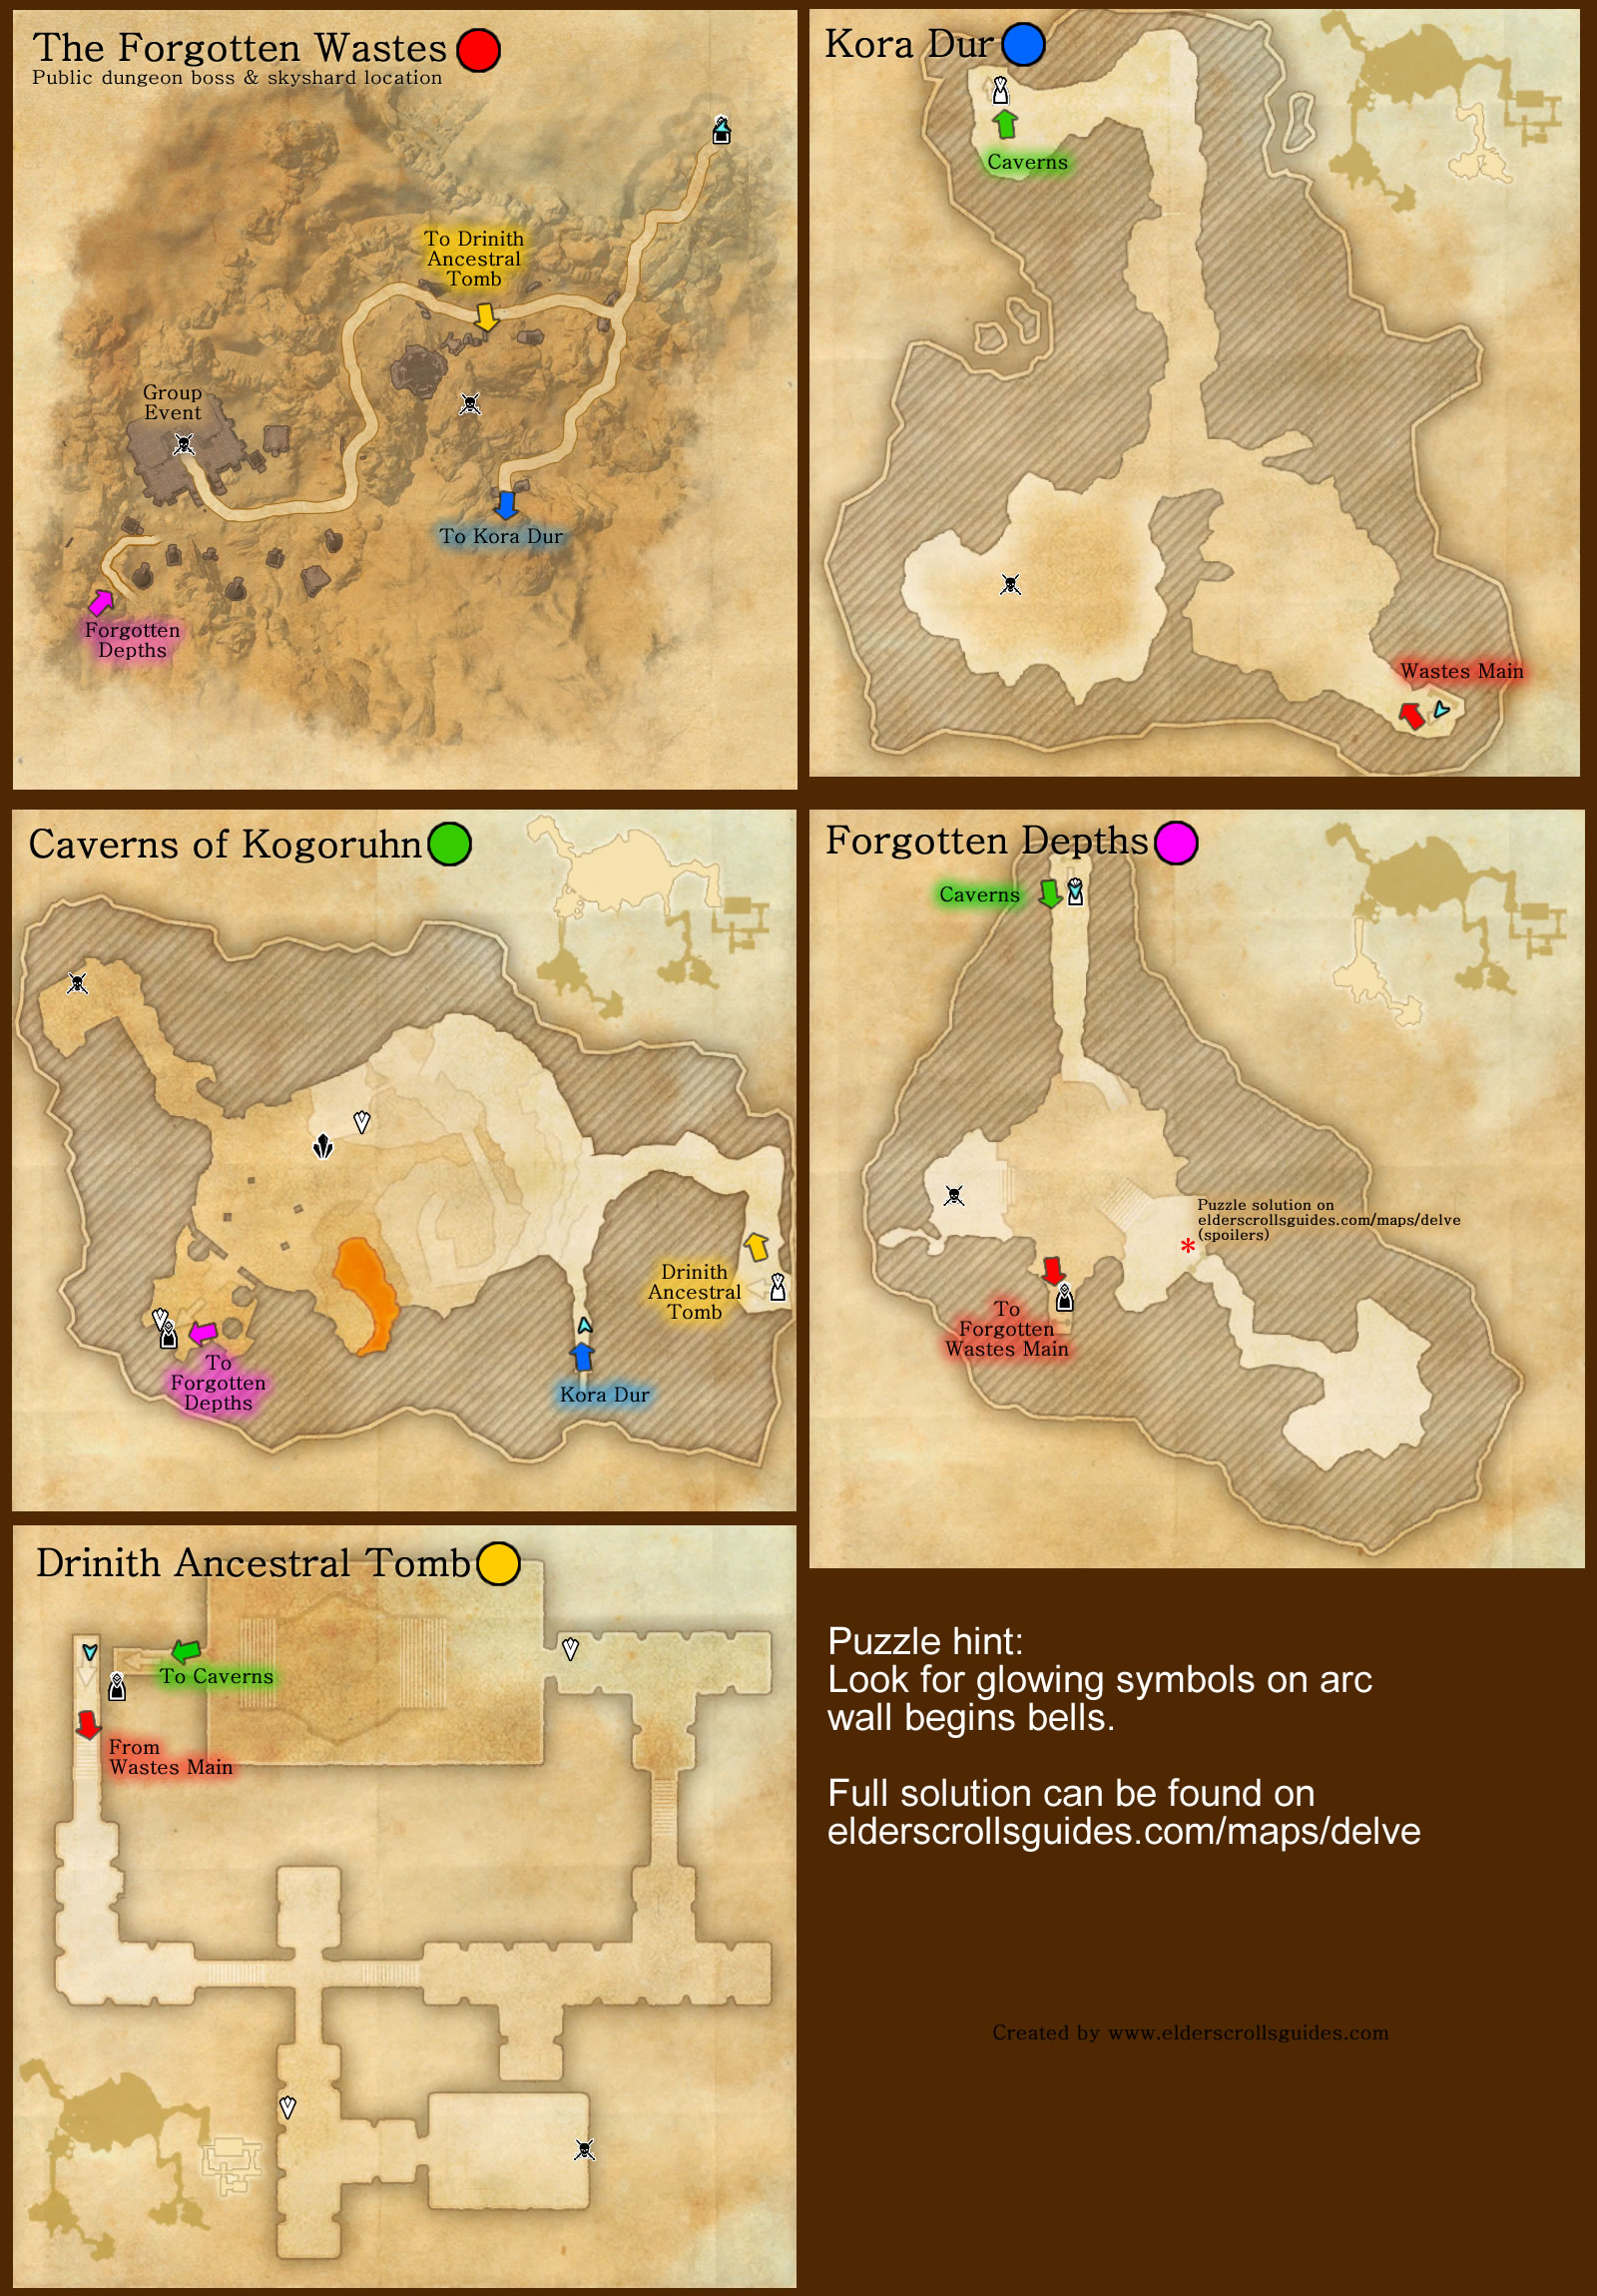 The Forgotten Wastes public dungeon map